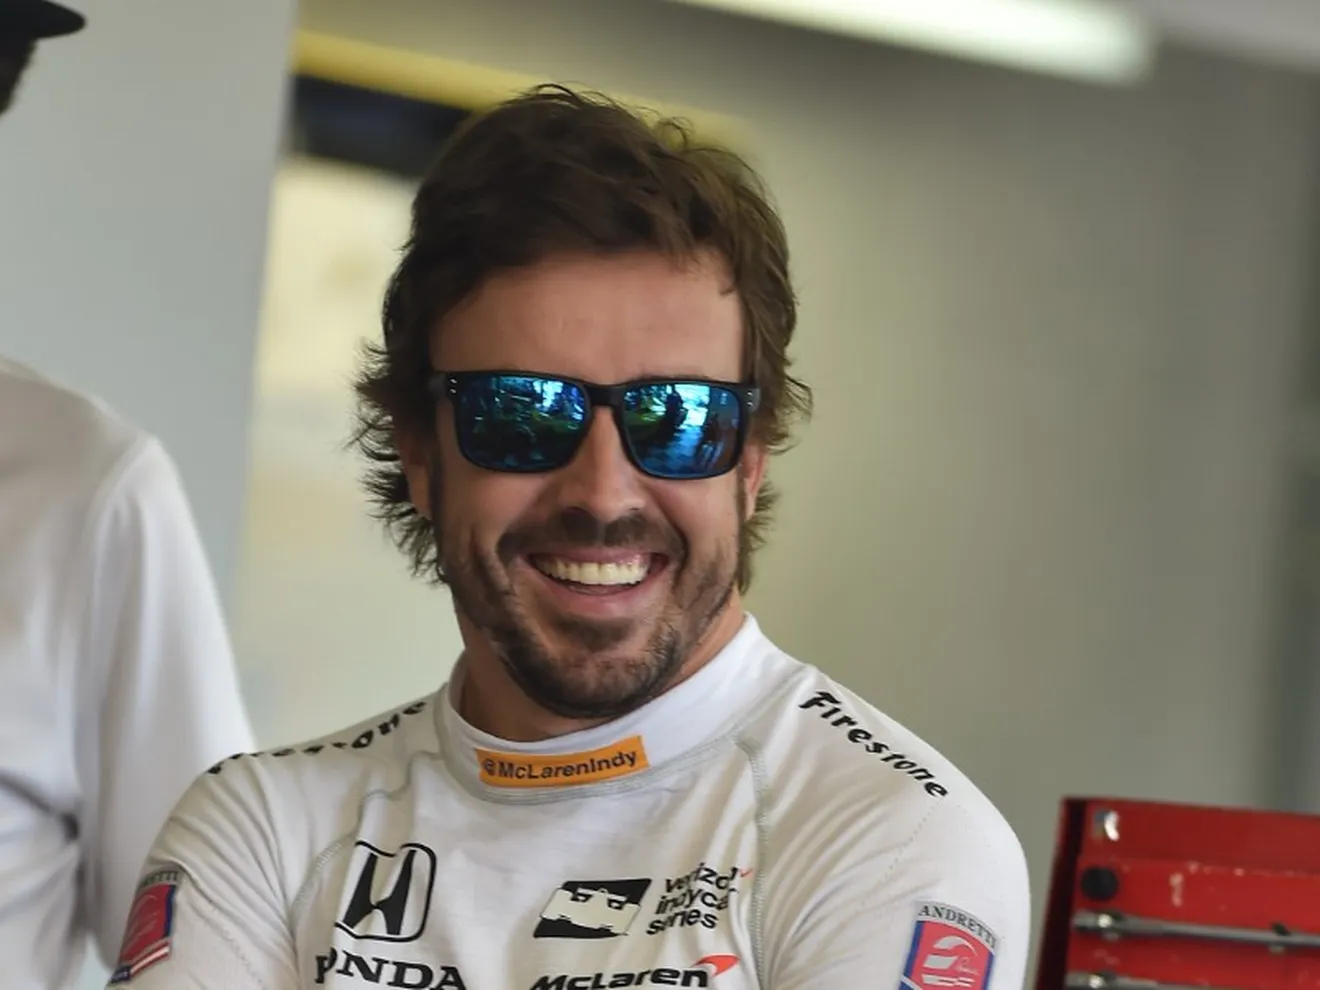 [Video] Alonso saca provecho del Fast Friday